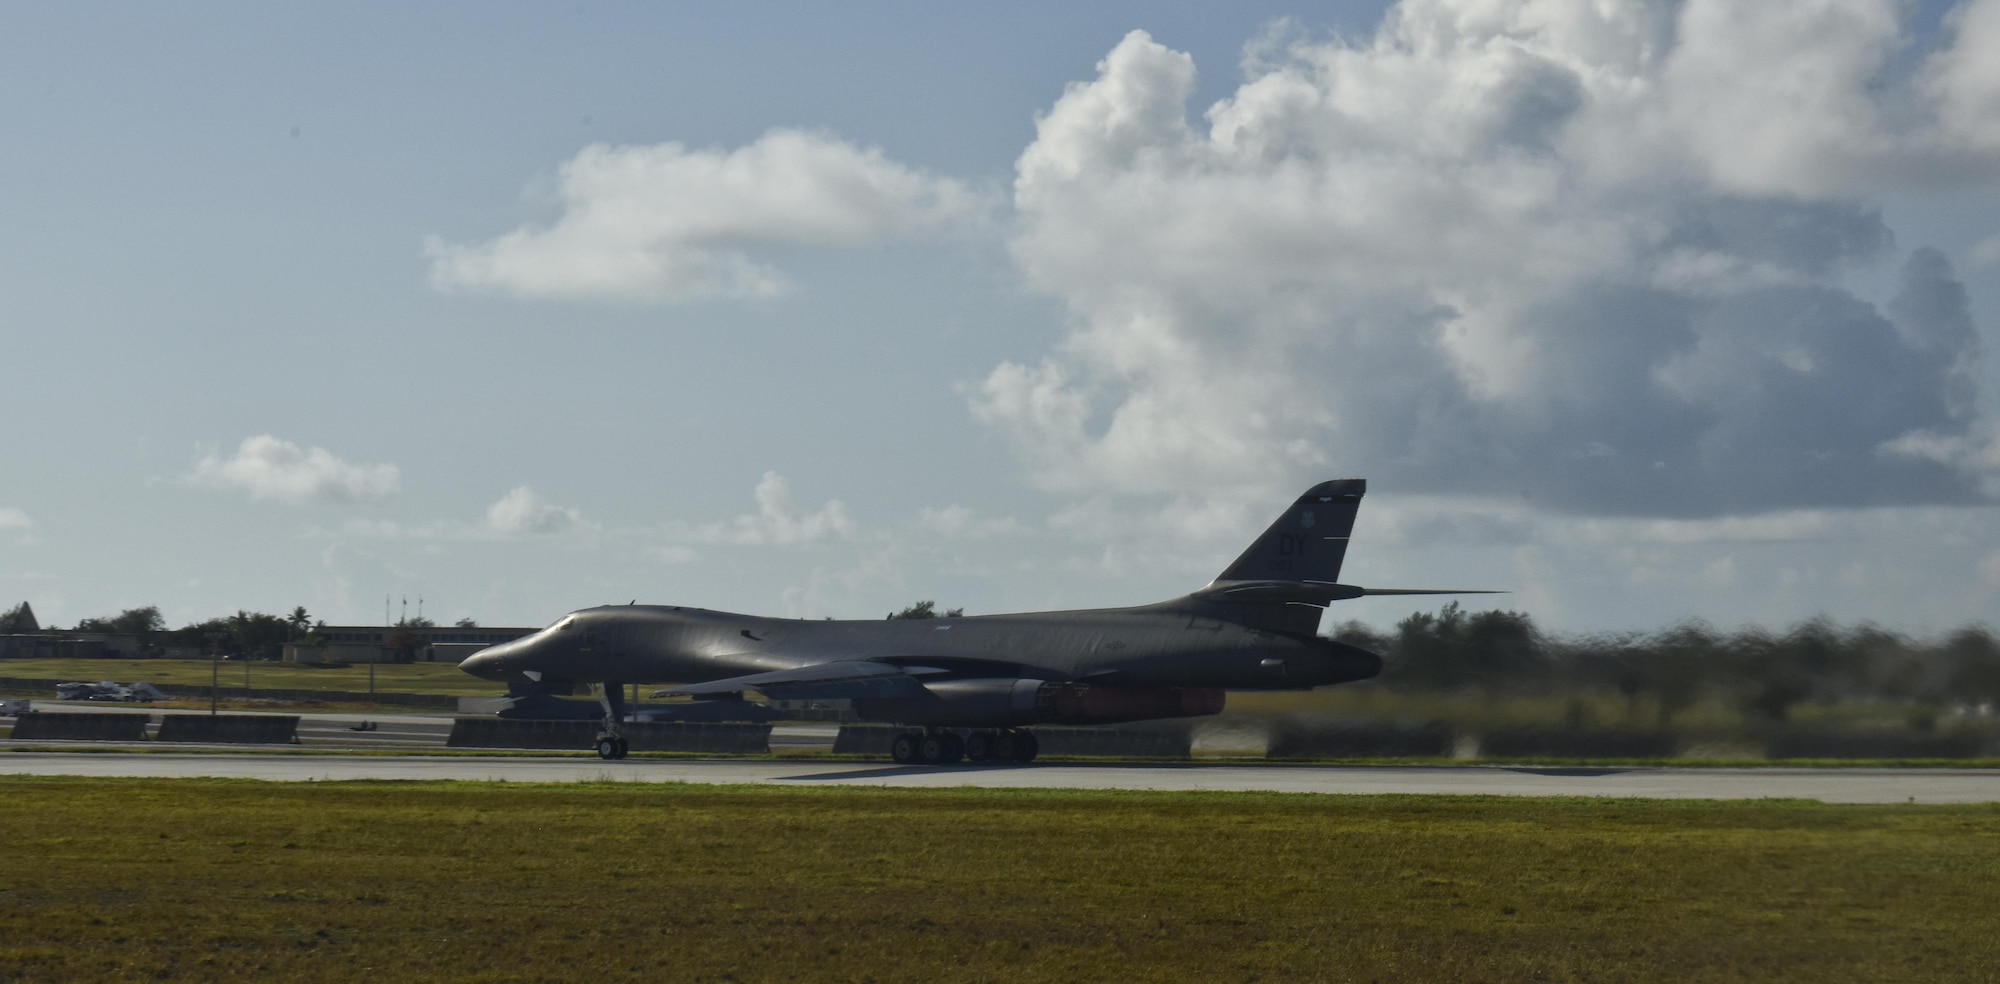 A U.S. Air Force B-1B Lancer assigned to the 9th Expeditionary Bomb Squadron, deployed from Dyess Air Force Base, Texas, takes off from Andersen Air Force Base, Guam, for a 10-hour mission through the South China Sea, operating with the U.S. Navy's Arleigh Burke-class guided-missile destroyer USS Sterett (DDG 104), June 8, 2017. The joint training, organized under U.S. Pacific Command's continuous bomber presence (CBP), allows the Air Force and Navy to increase interoperability by refining joint tactics, techniques and procedures while simultaneously strengthening the ability to seamlessly integrate operations. (U.S. Air Force photo/Tech. Sgt. Richard P. Ebensberger)